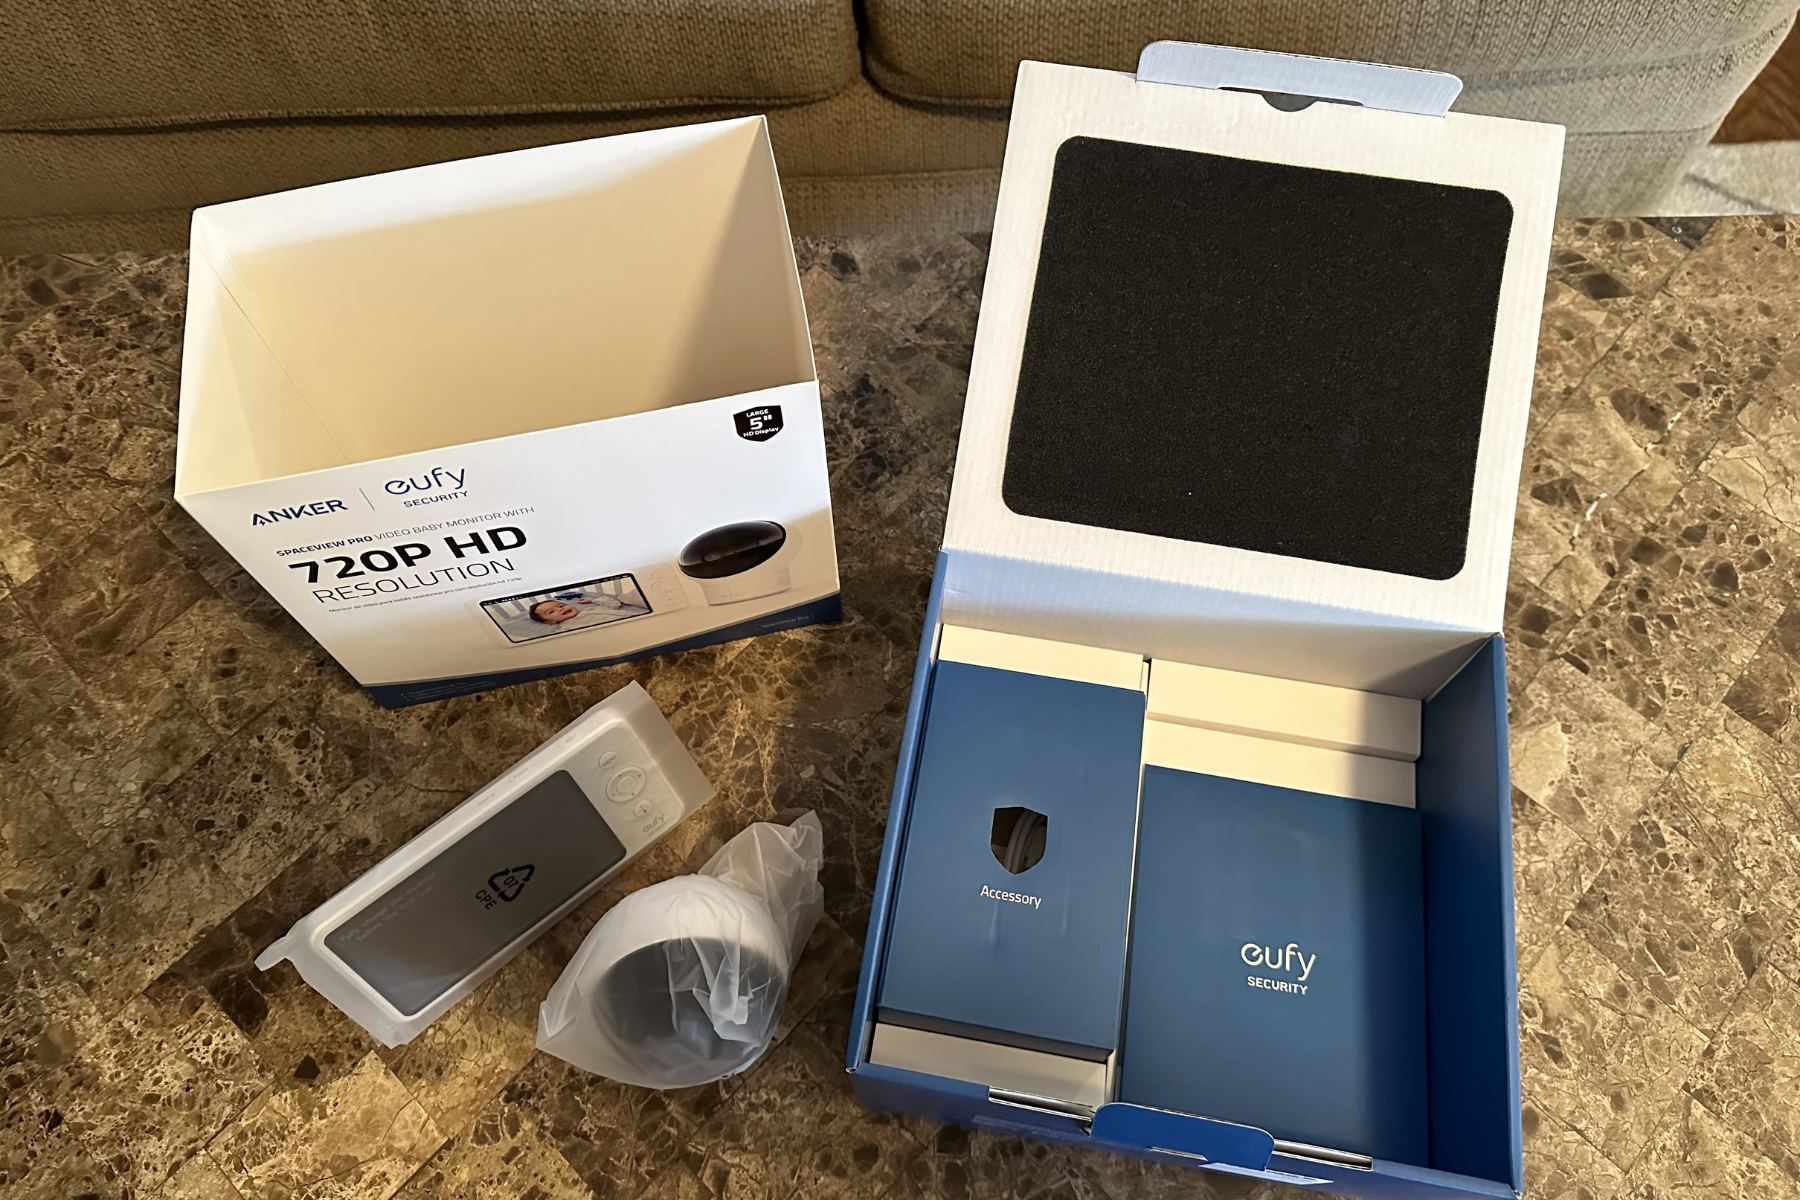 Eufy SpaceView Pro unboxing